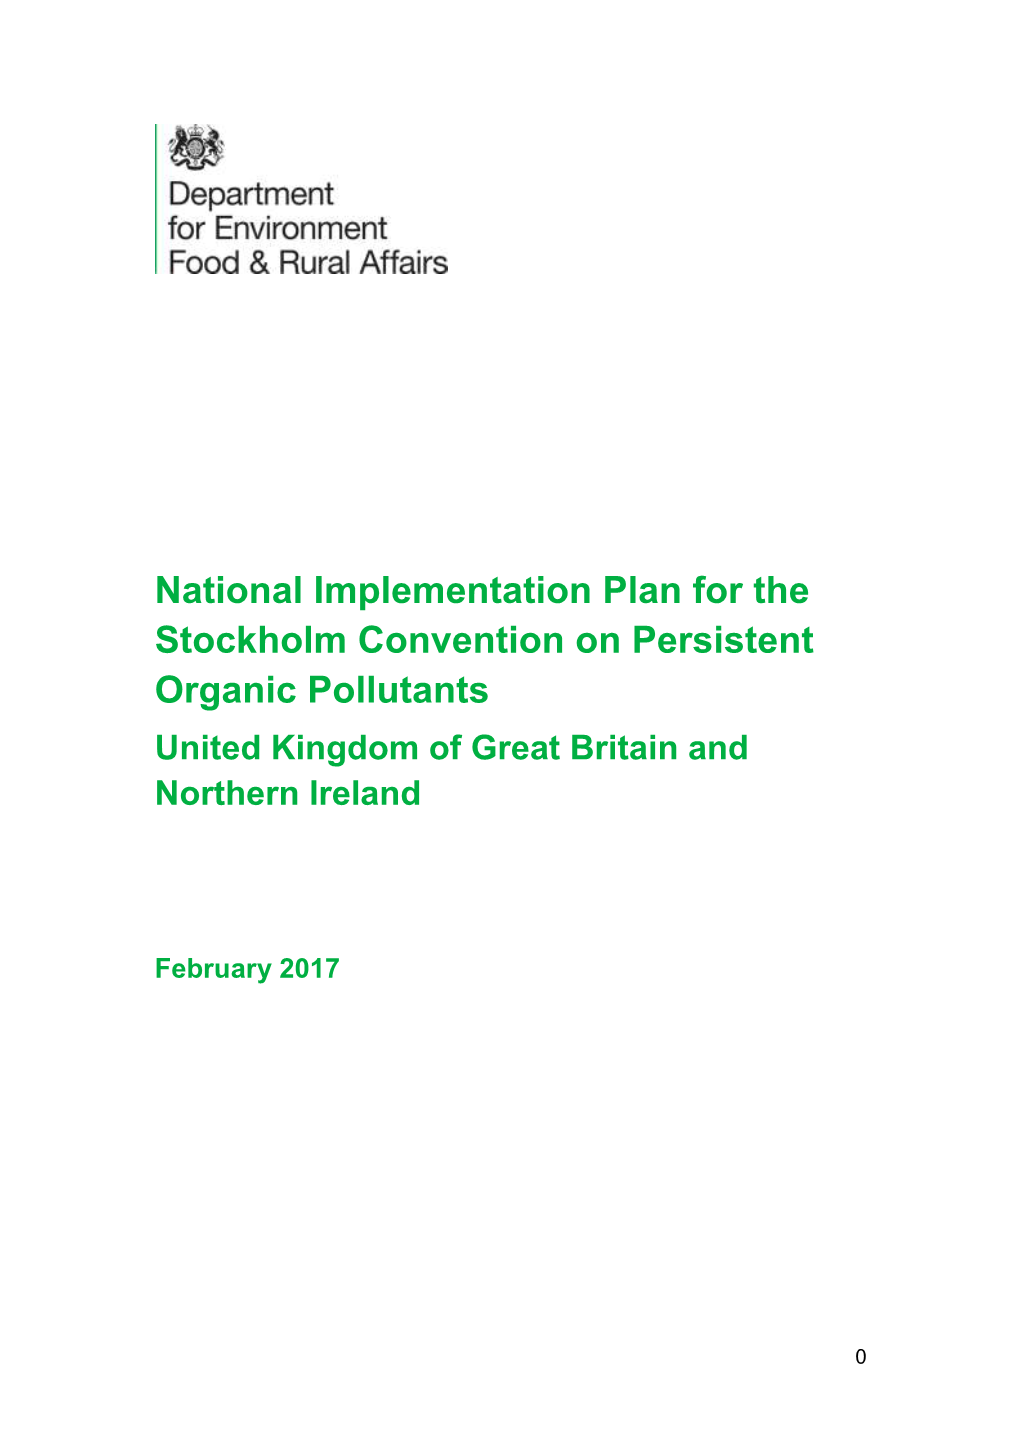 National Implementation Plan for the Stockholm Convention on Persistent Organic Pollutants United Kingdom of Great Britain and Northern Ireland